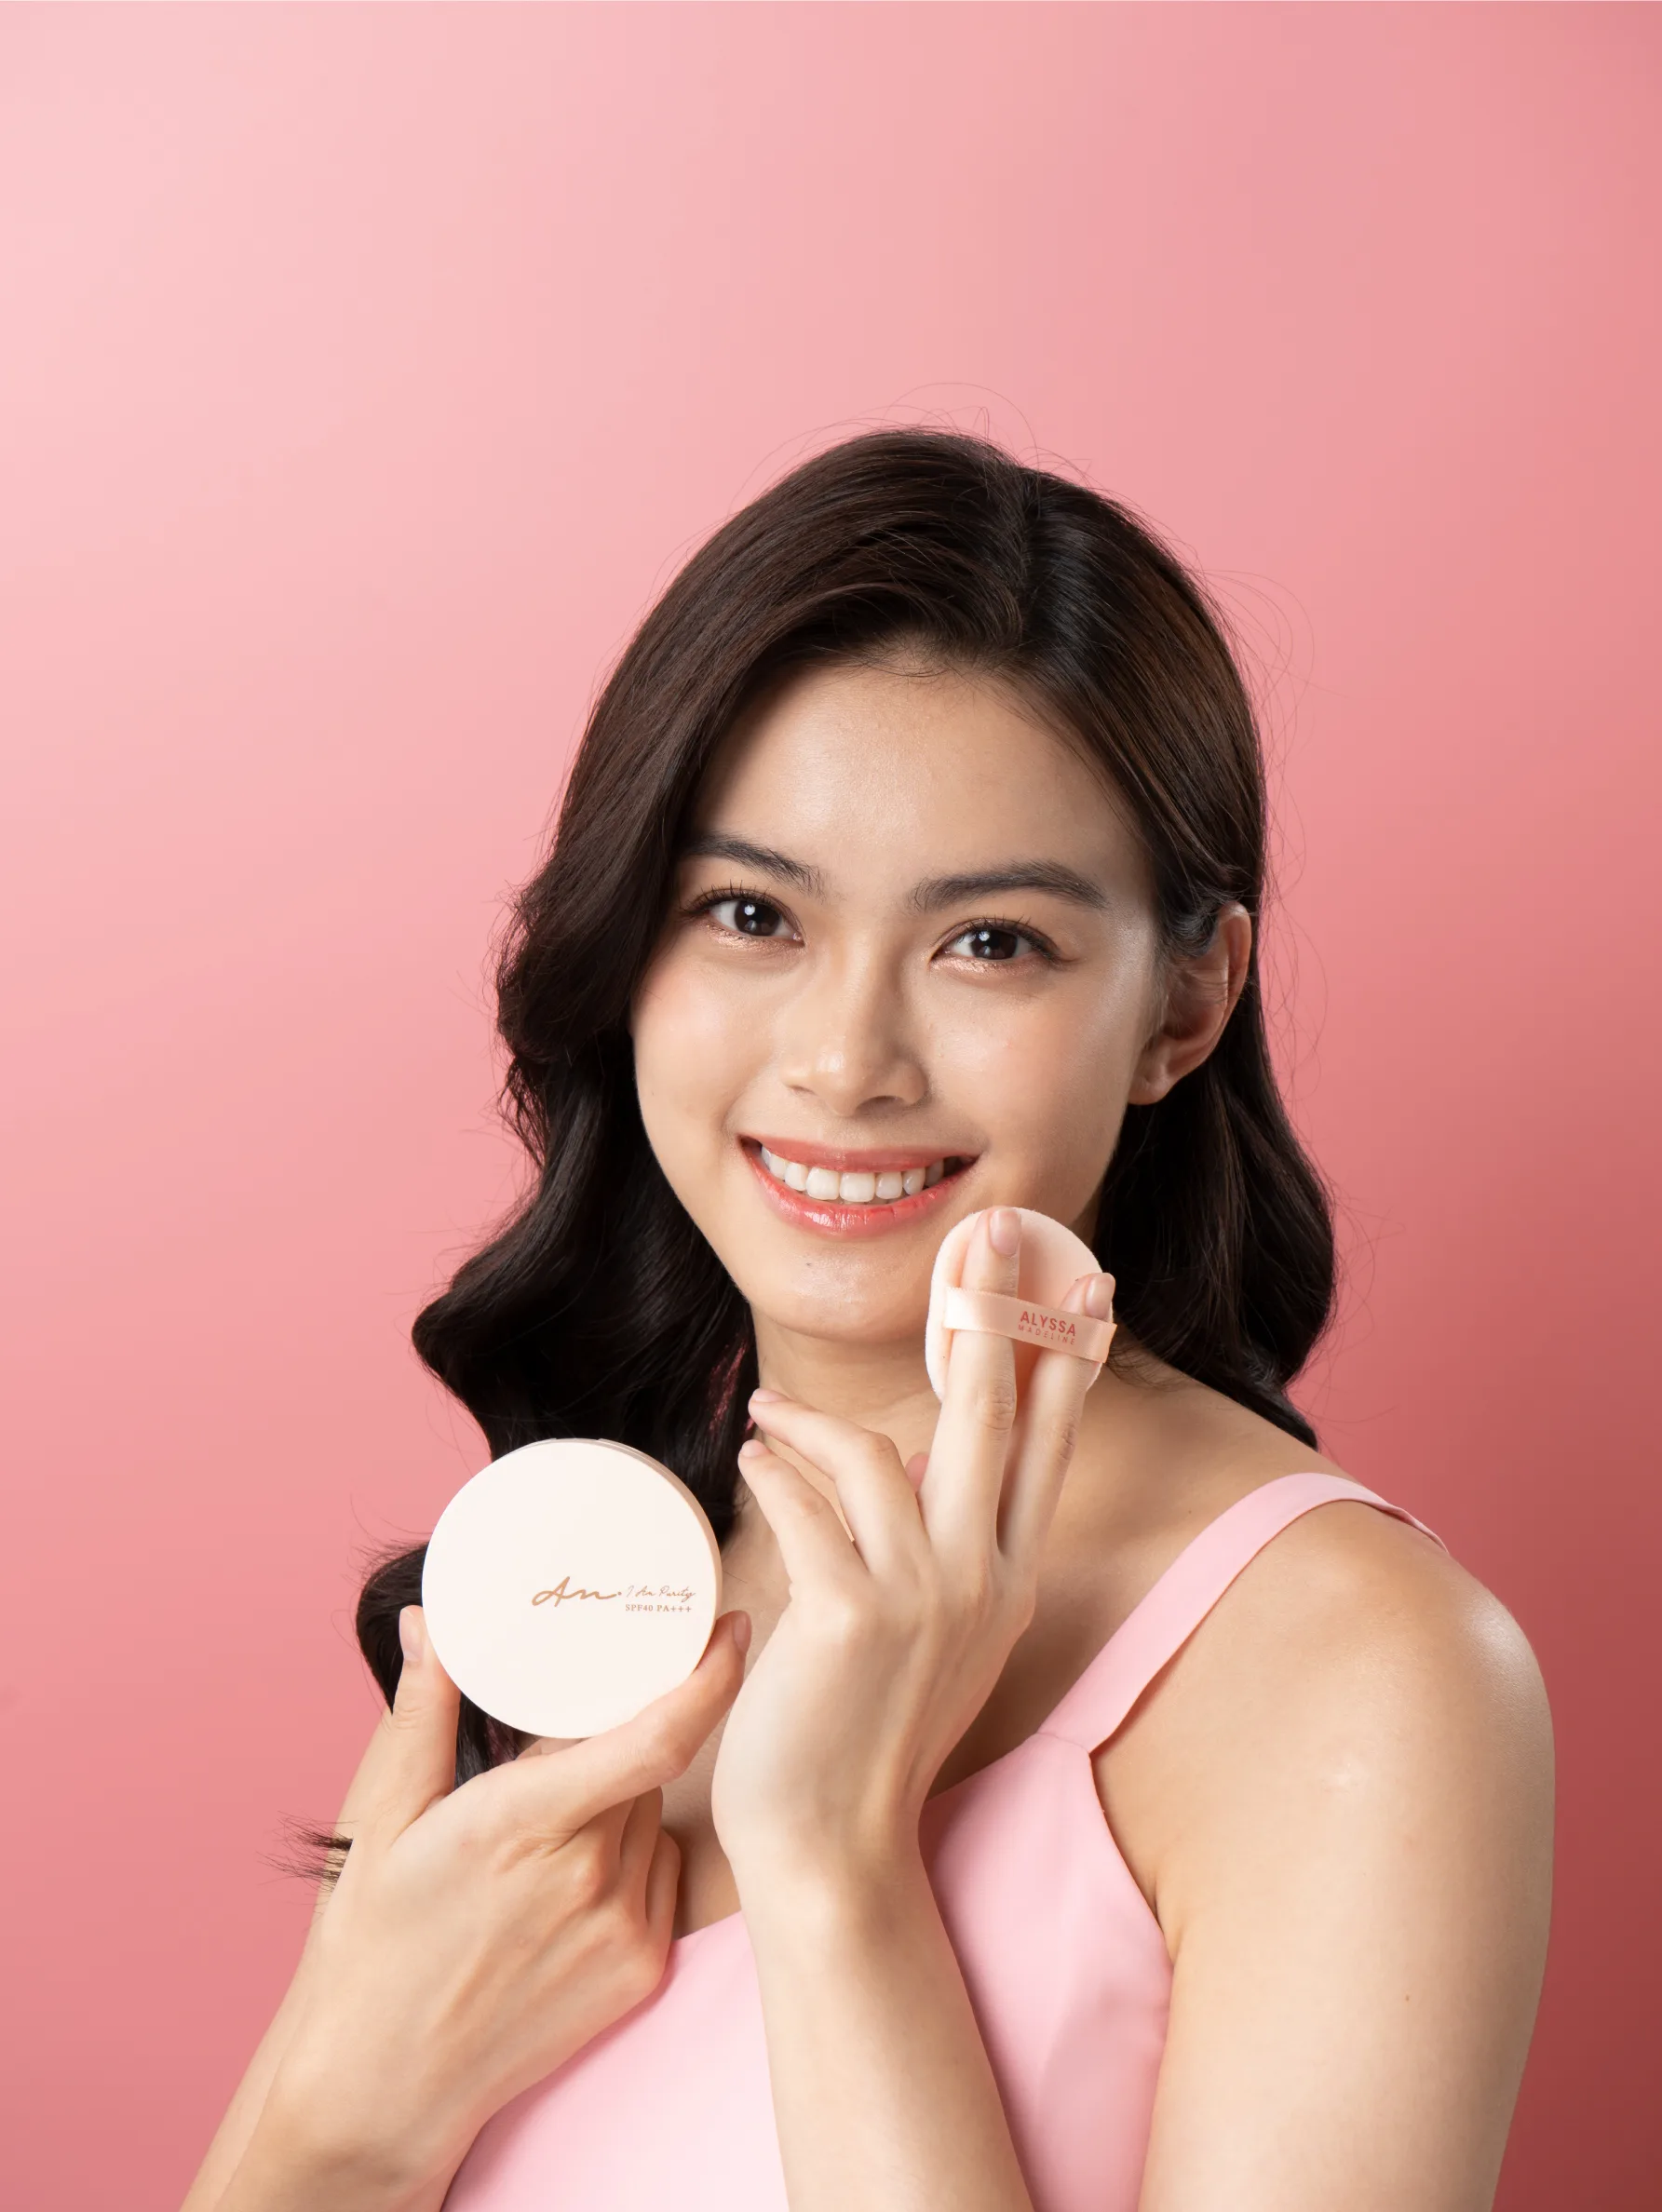 Confident woman with an elegant updo hairstyle, wearing a white off-the-shoulder blouse, poses behind a display of 'Alyssa Madeline' beauty products, including two bottles, two compact powders, and five lip glosses, all arrayed neatly against a soft pink background.